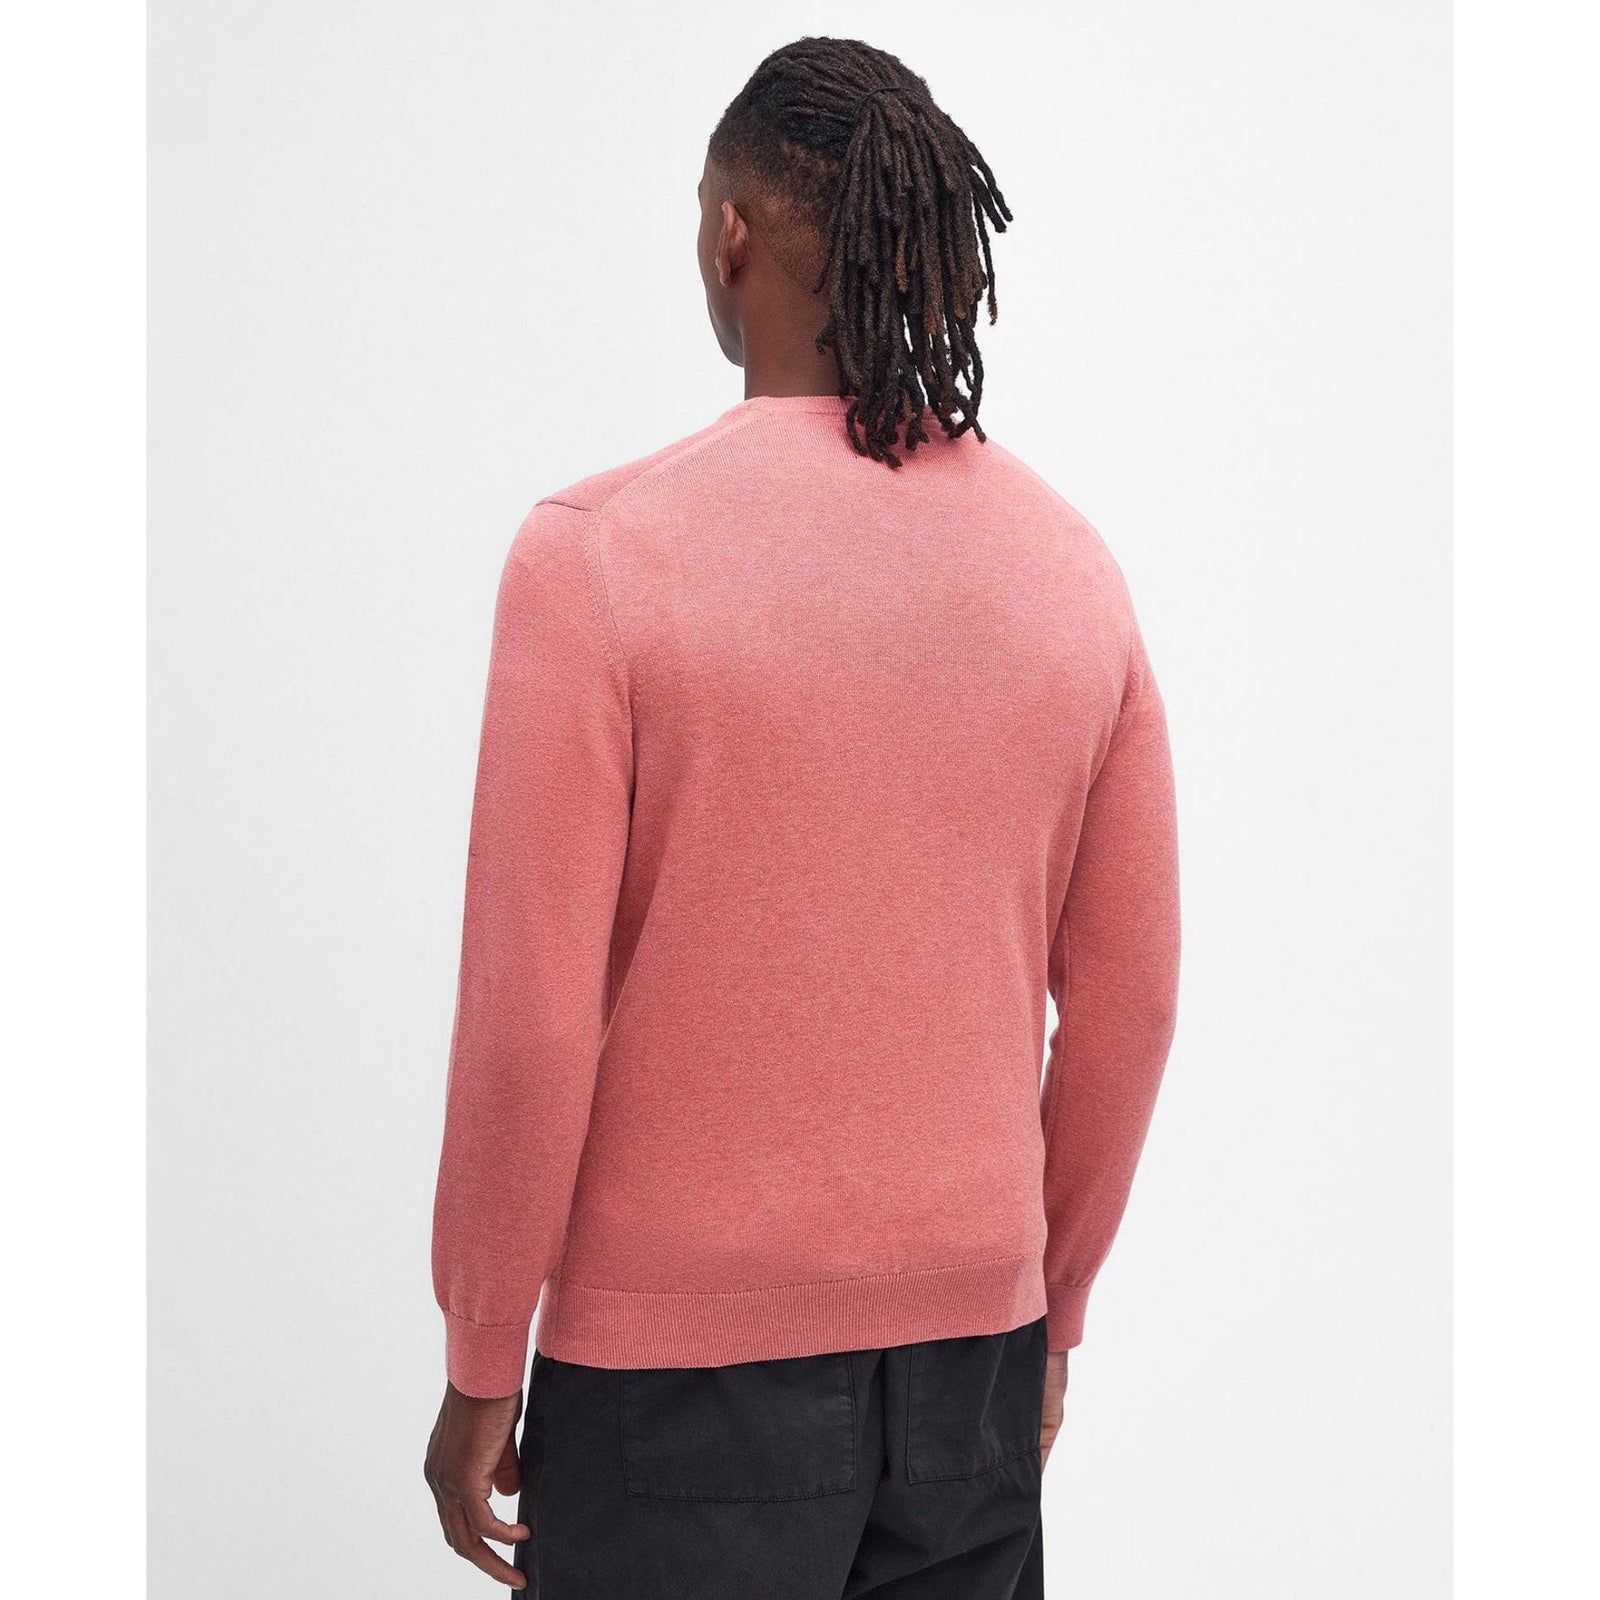 Barbour Pima Cotton Crew Neck in Pink Clay